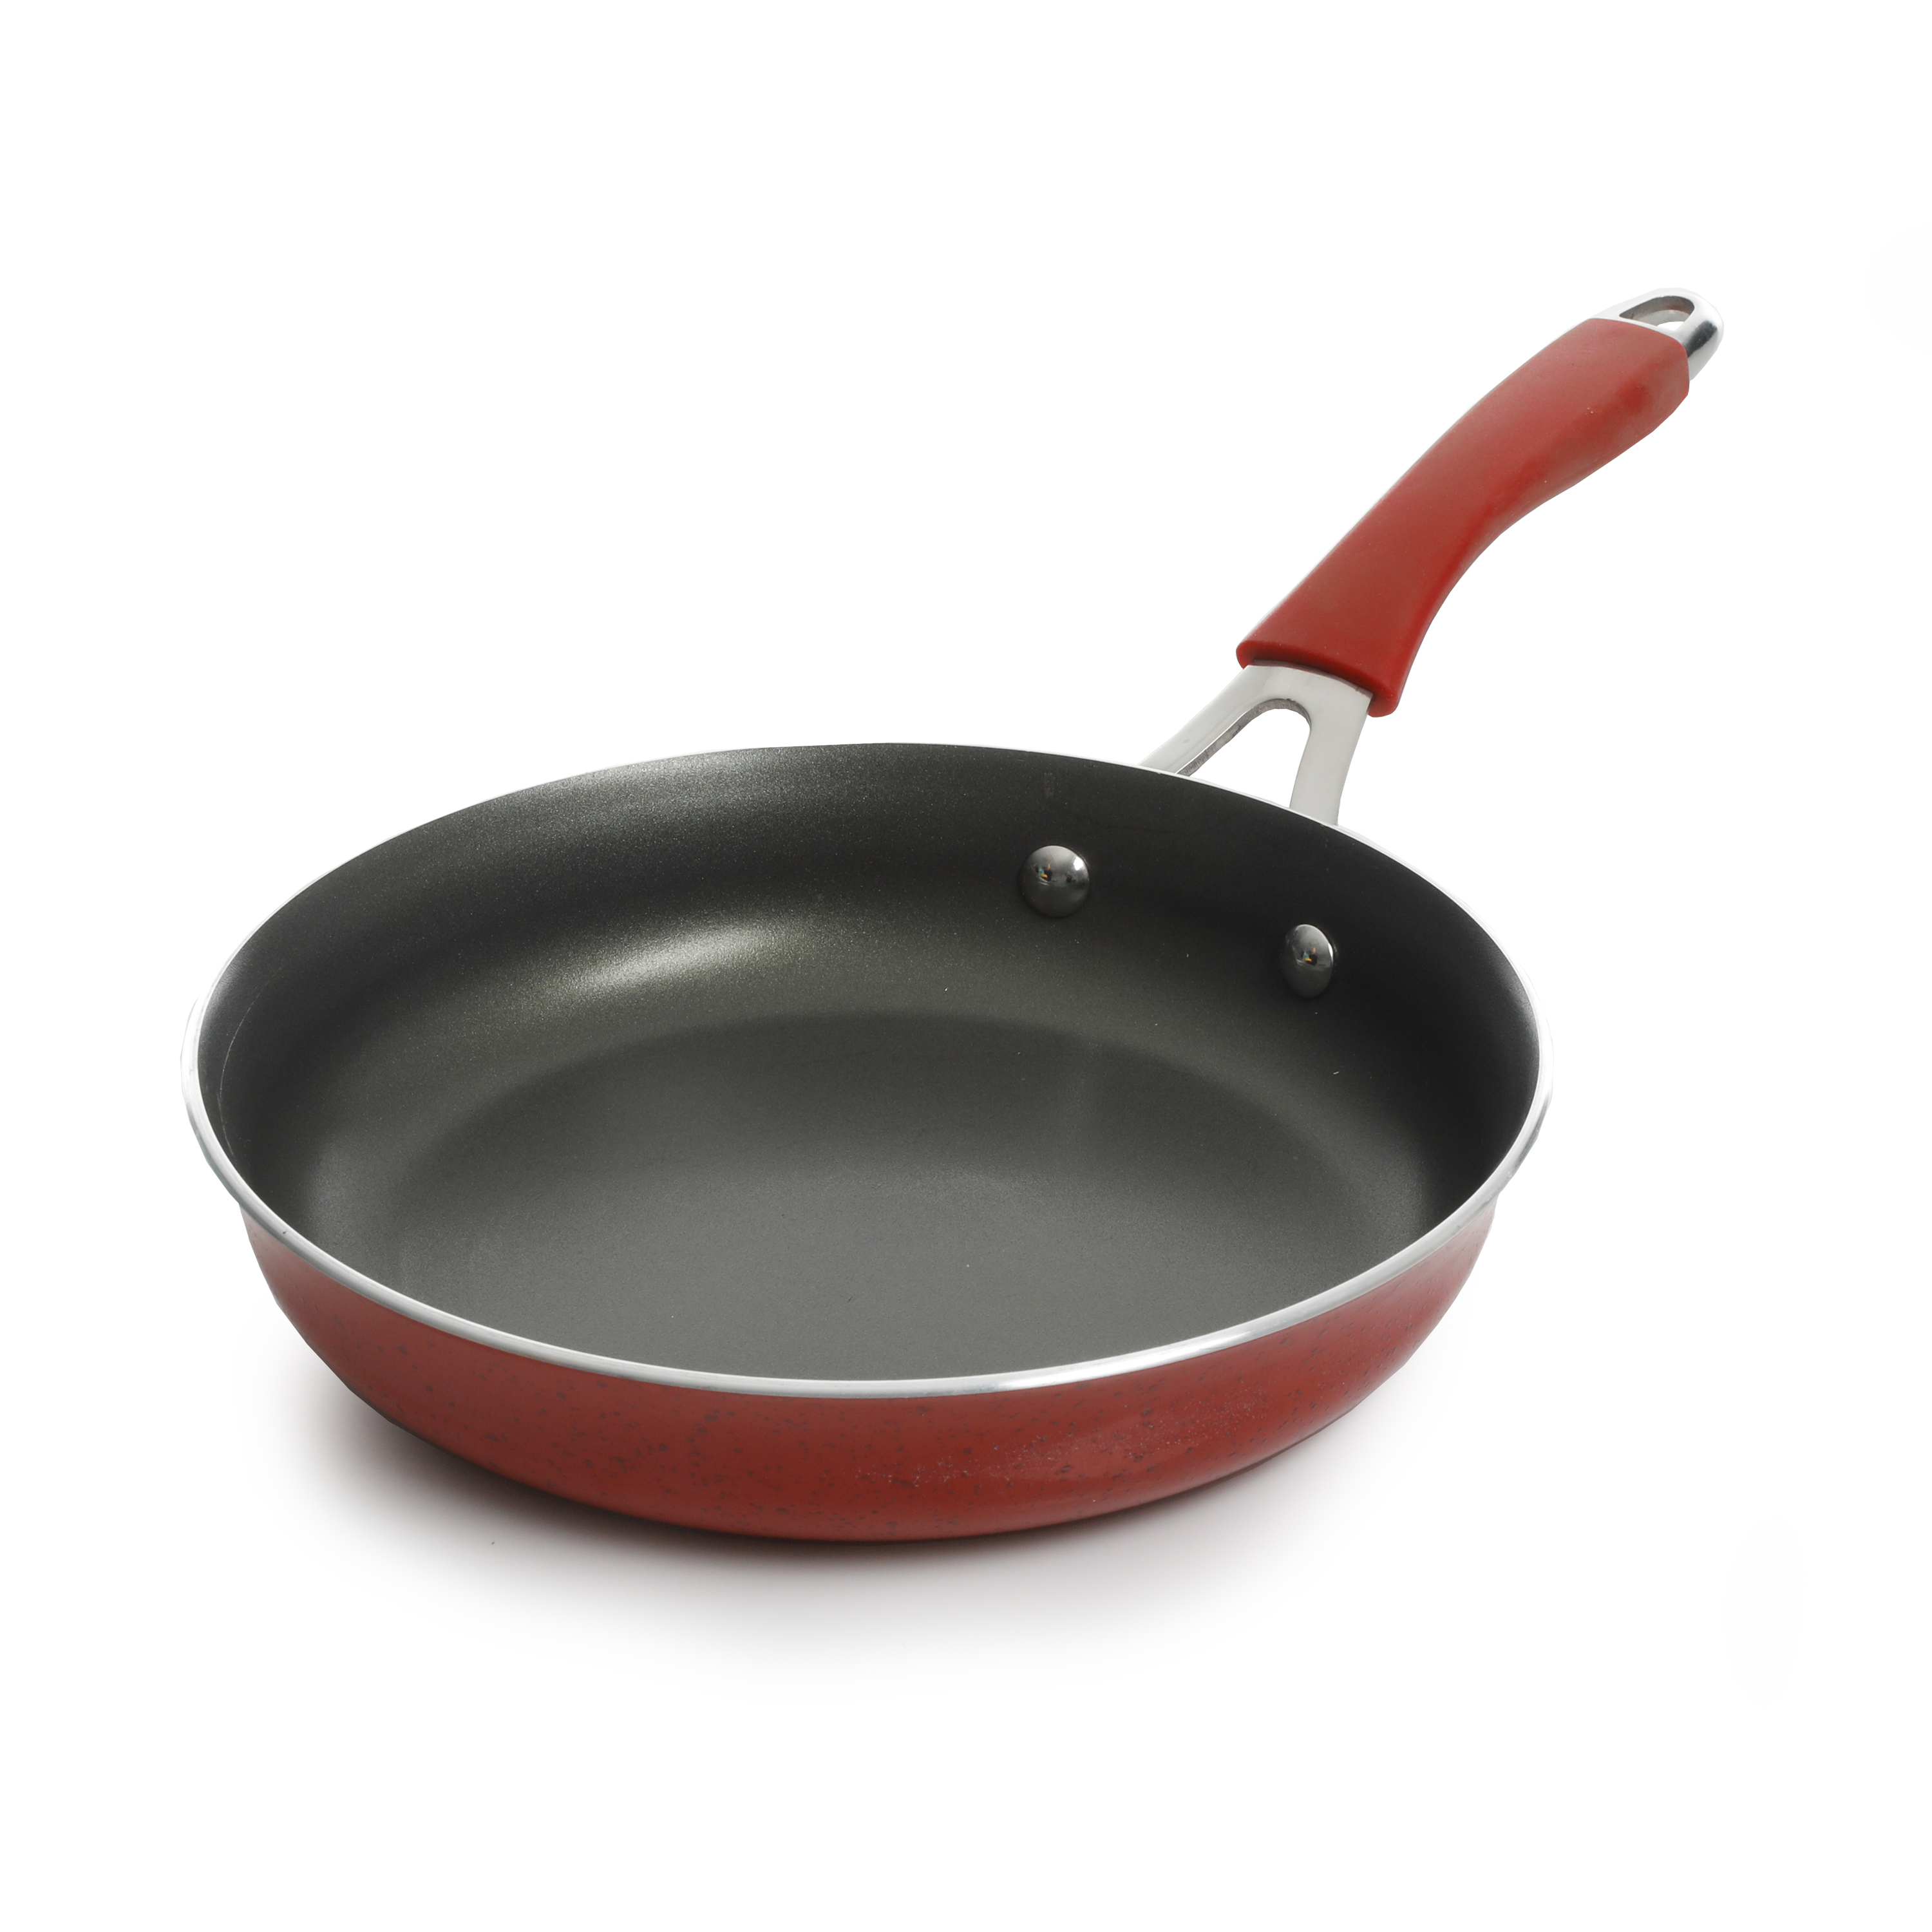 The Pioneer Woman Frontier Speckle Red 11-Inch & 9-Inch Non-Stick Fry Pan, 2 Piece - image 5 of 6